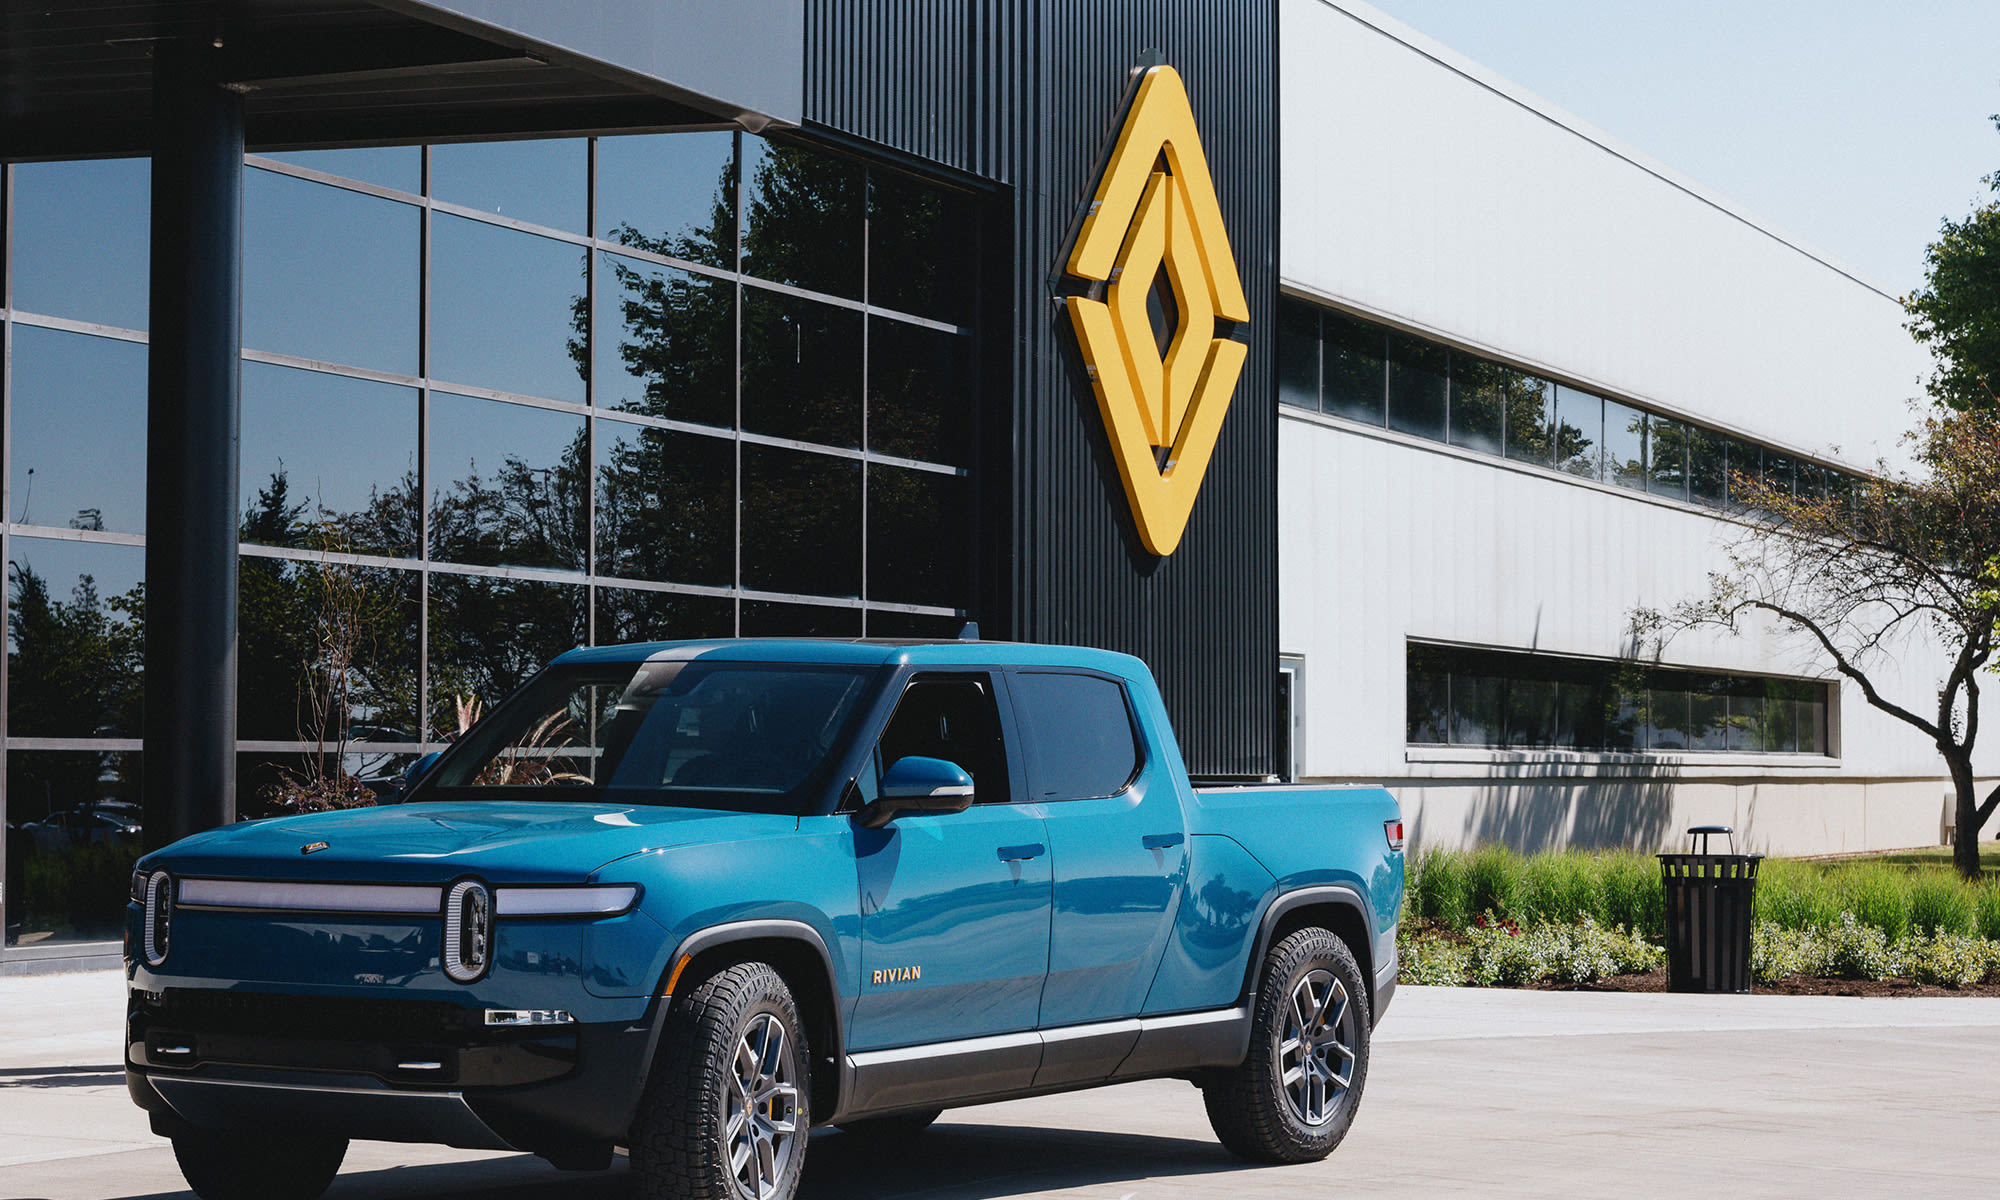 What Is the Highest Price of Rivian Stock Ever?